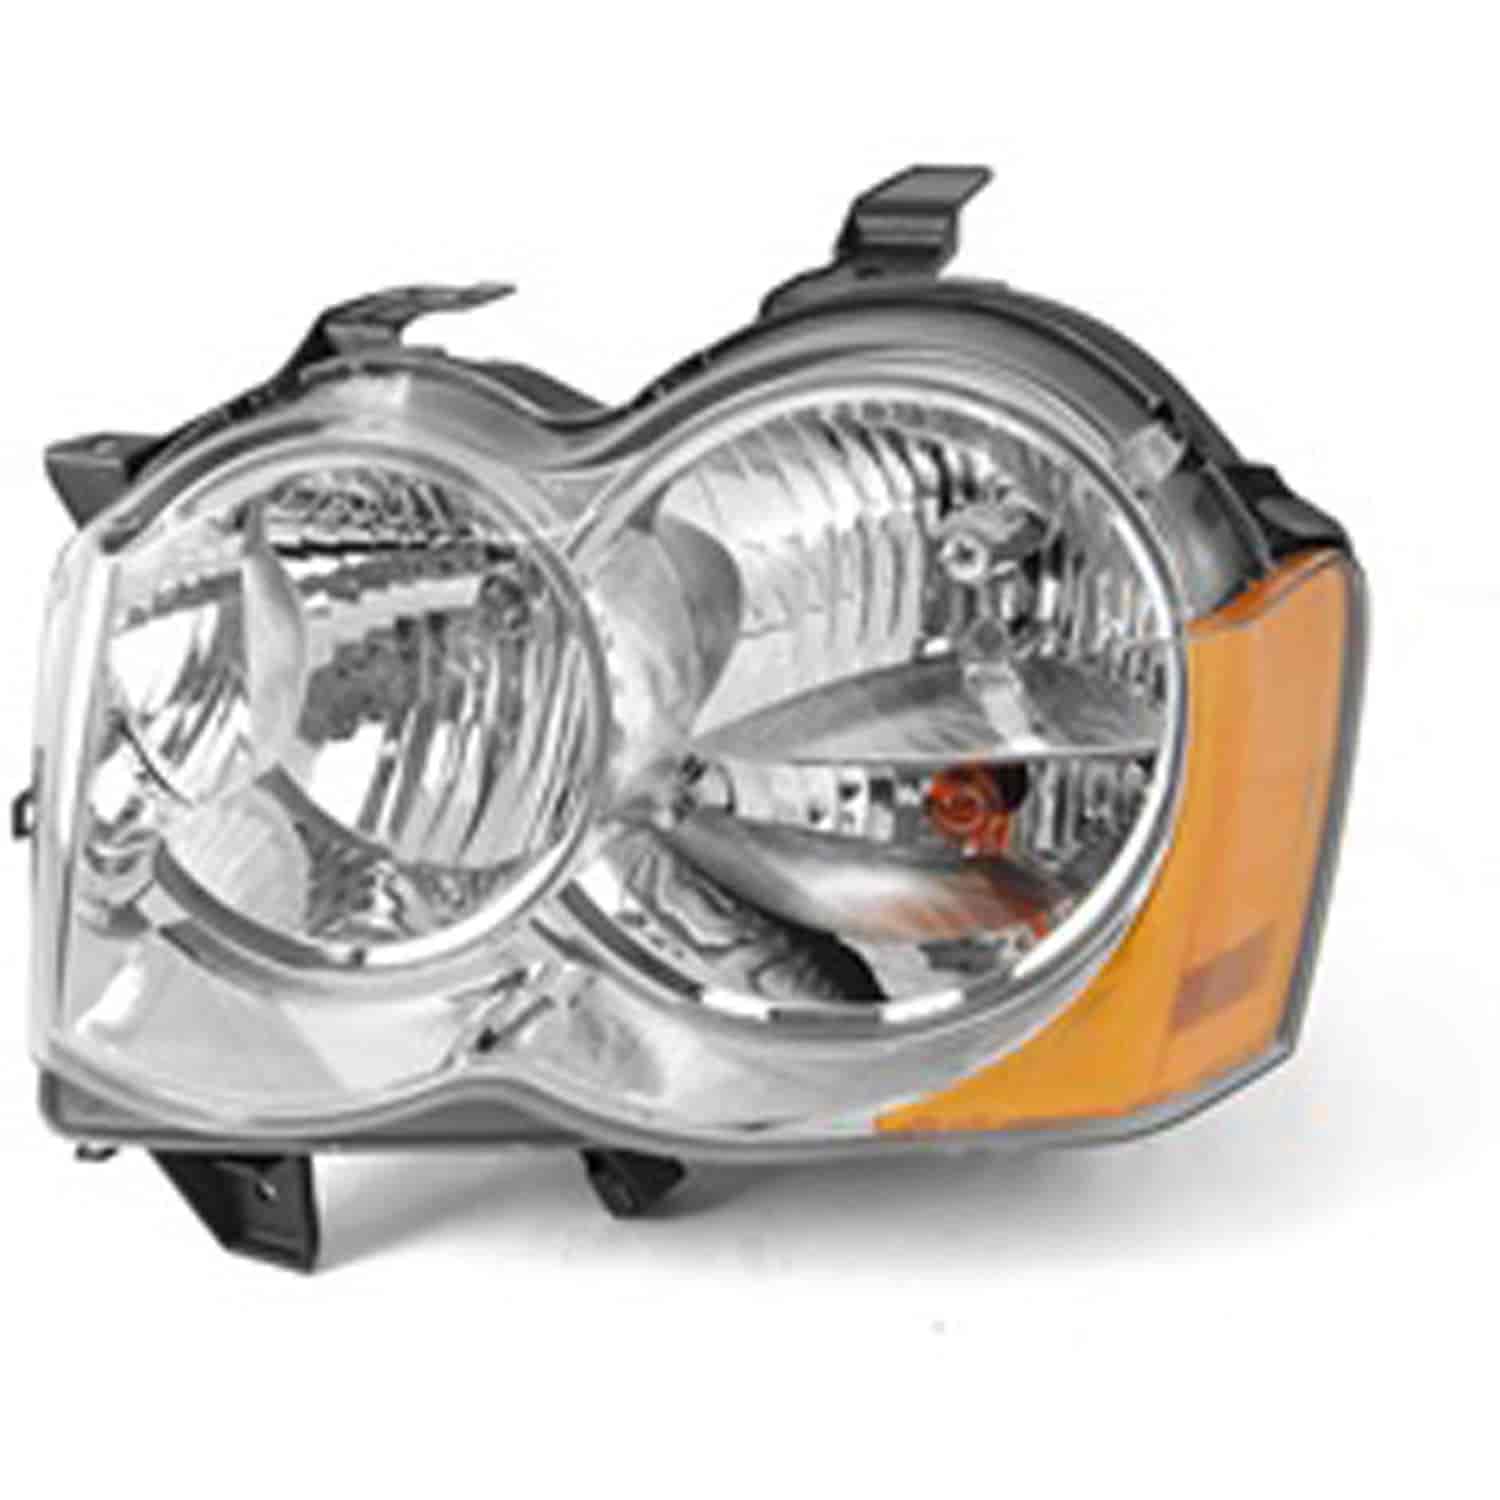 Replacement headlight assembly from Omix-ADA, Fits left side of 08-10 Jeep Liberty KKs and WK Grand Cherokee